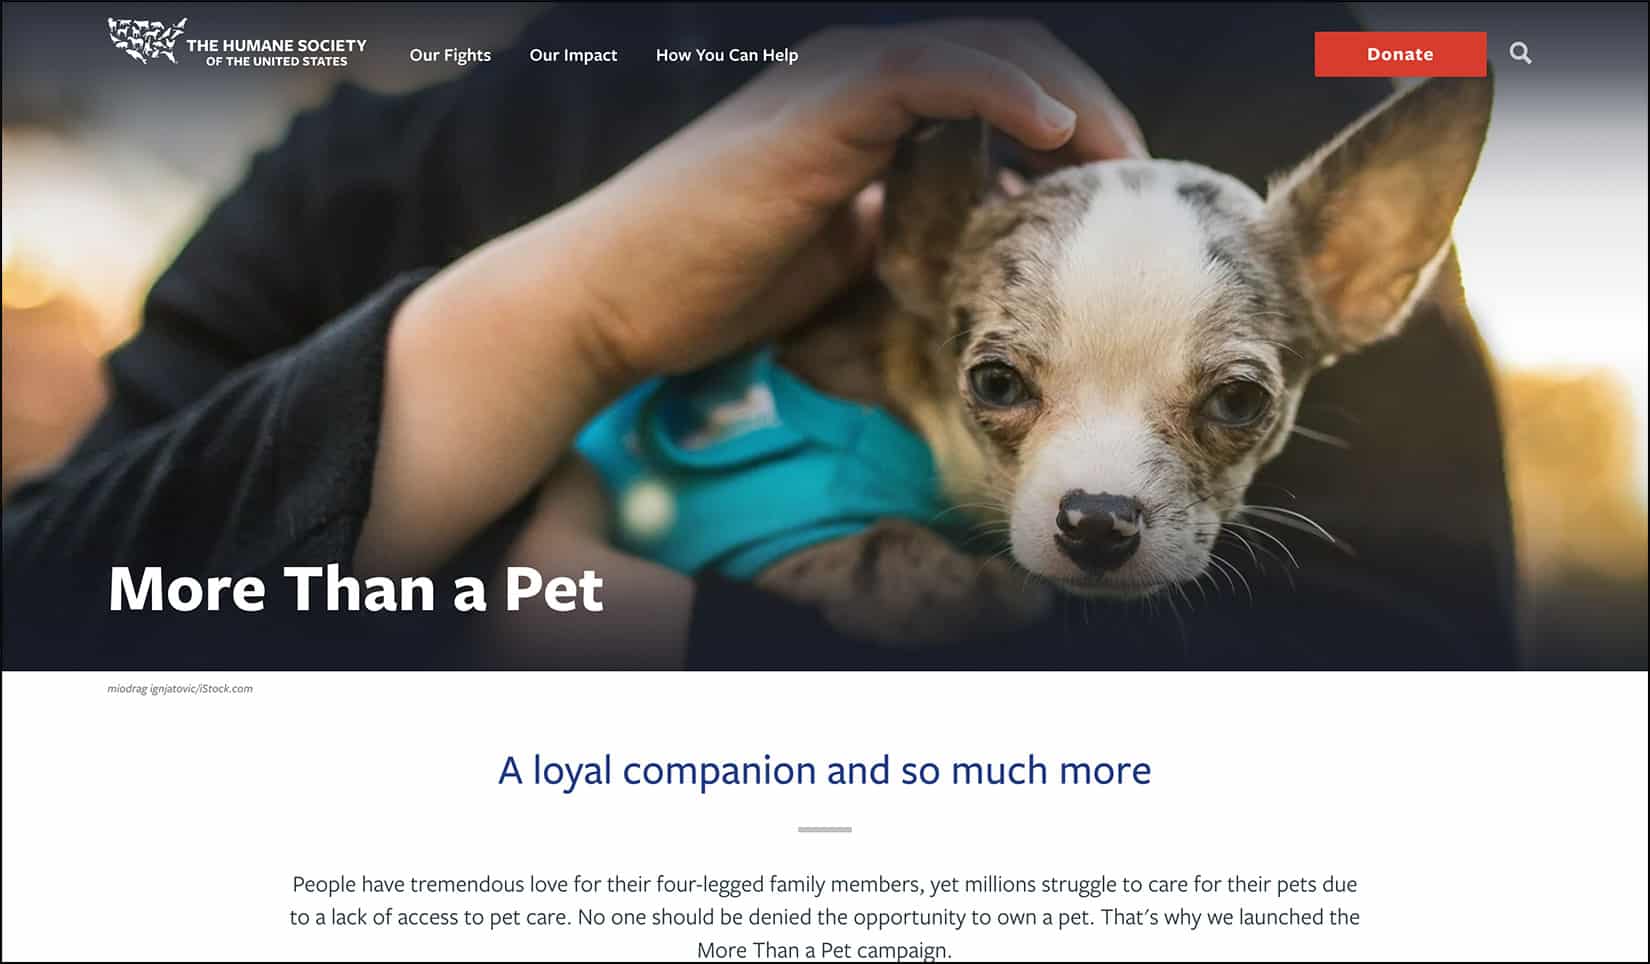 The More Than a Pet awareness campaign helped bring attention to unequal access to pet care. 